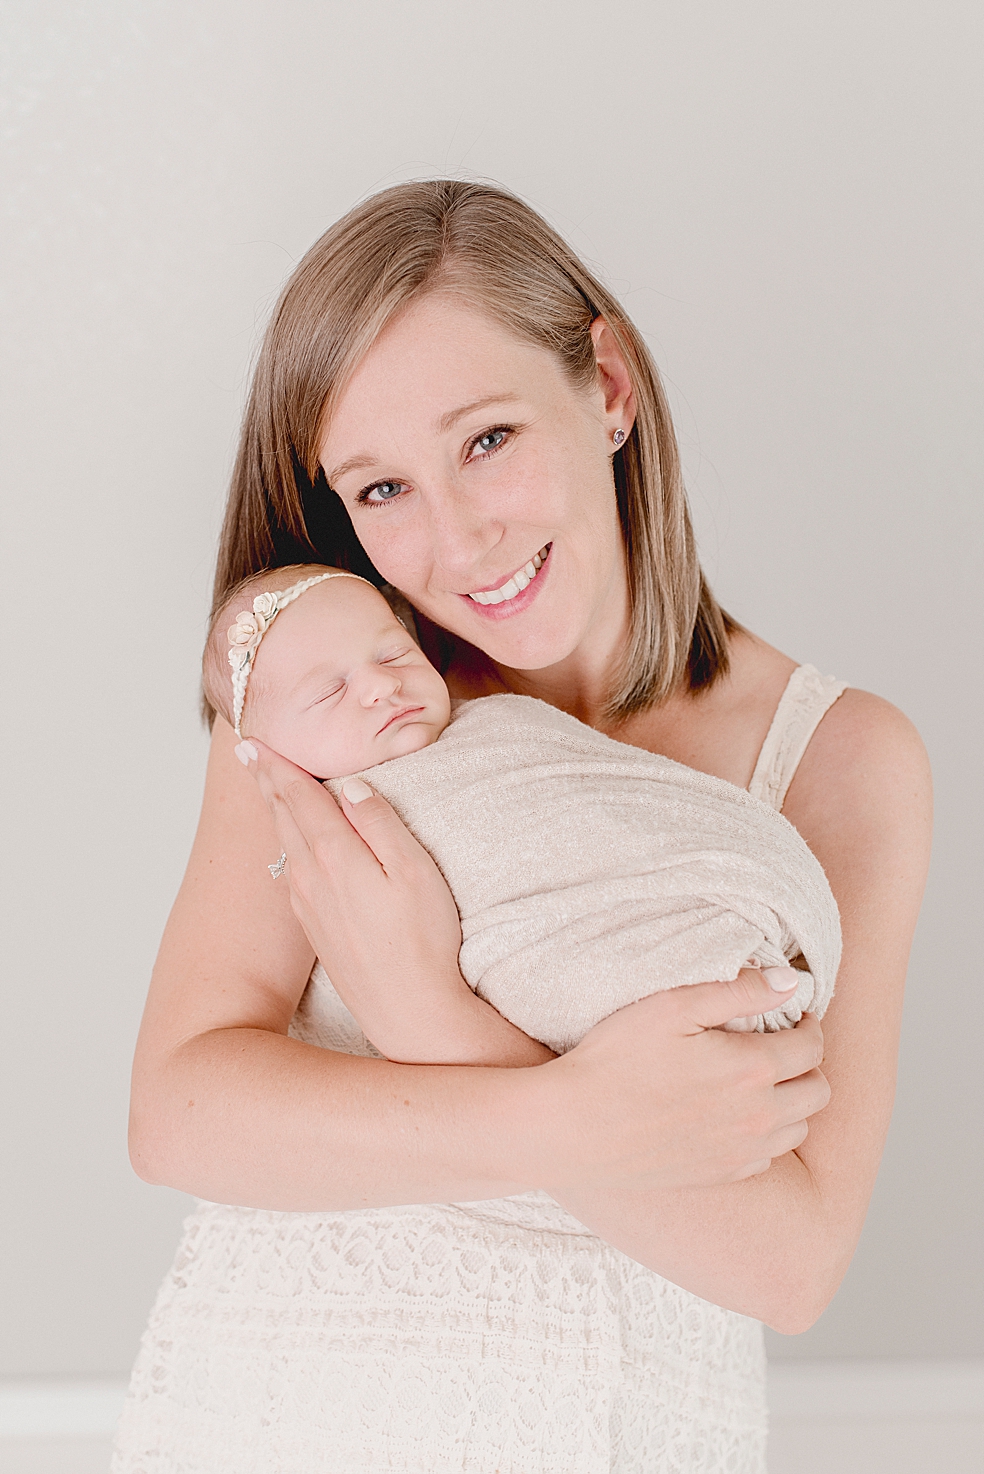 Mom snuggling with her newborn baby girl | Studio Newborn Session with Jessica Lee Photography